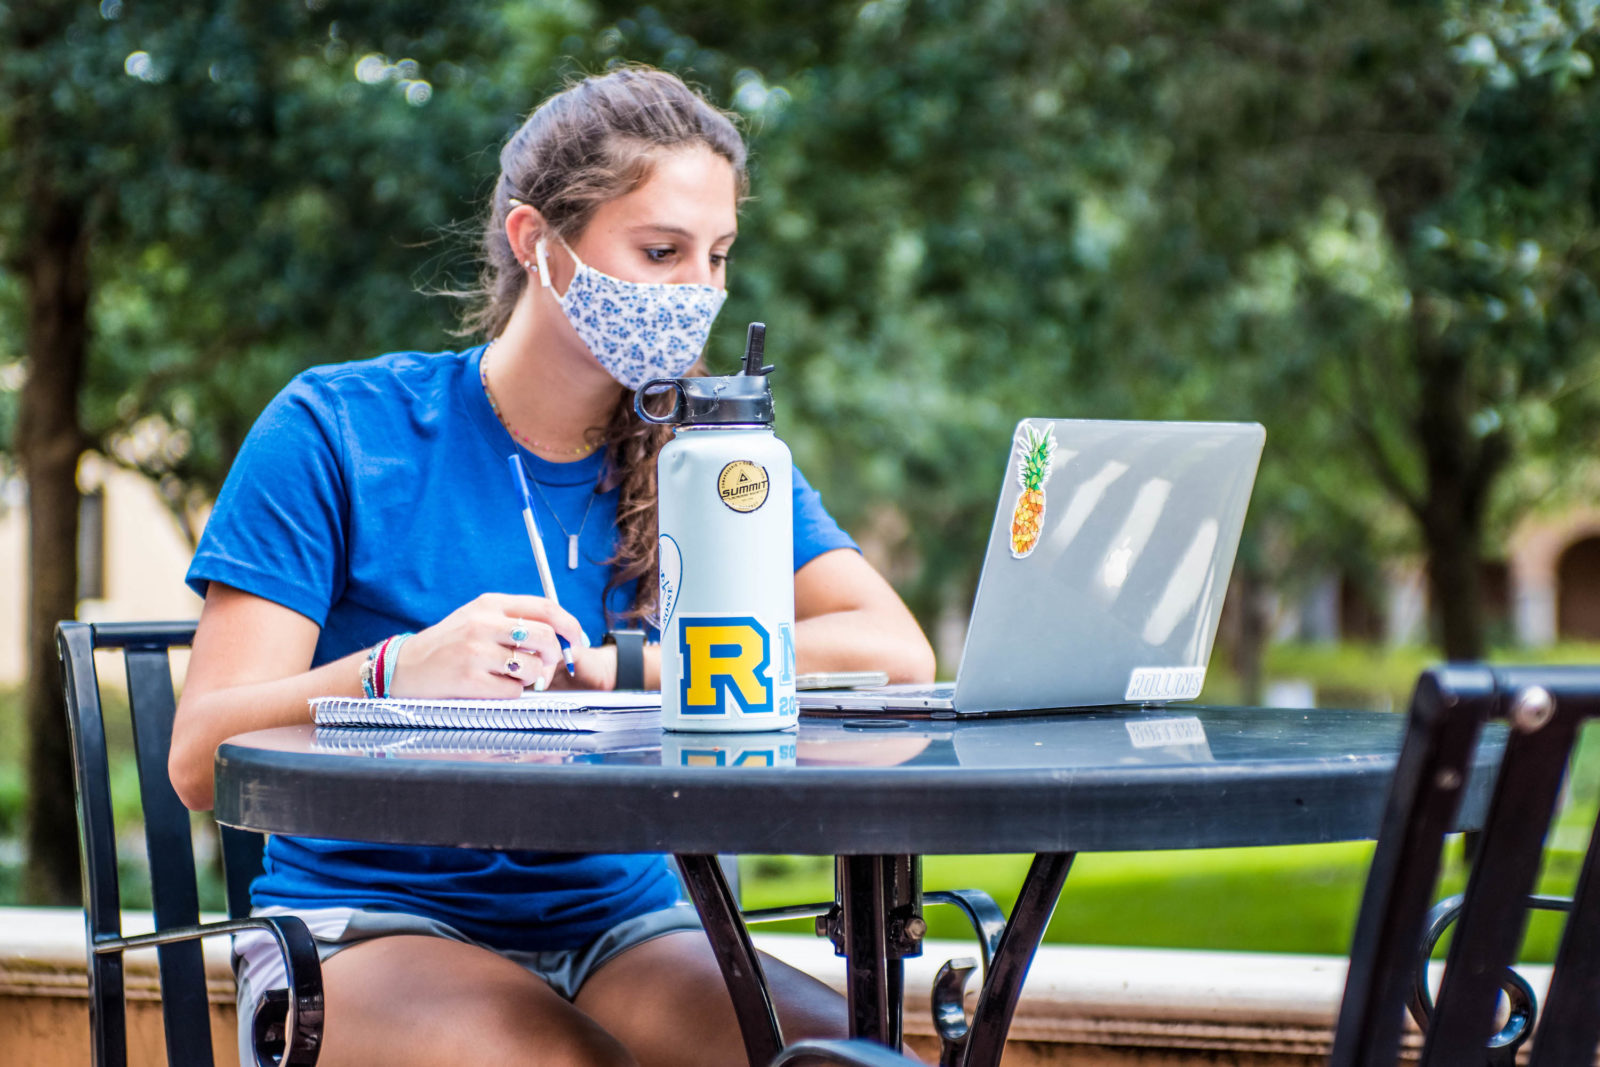 Rollins College student studies outside while wearing a face mask.